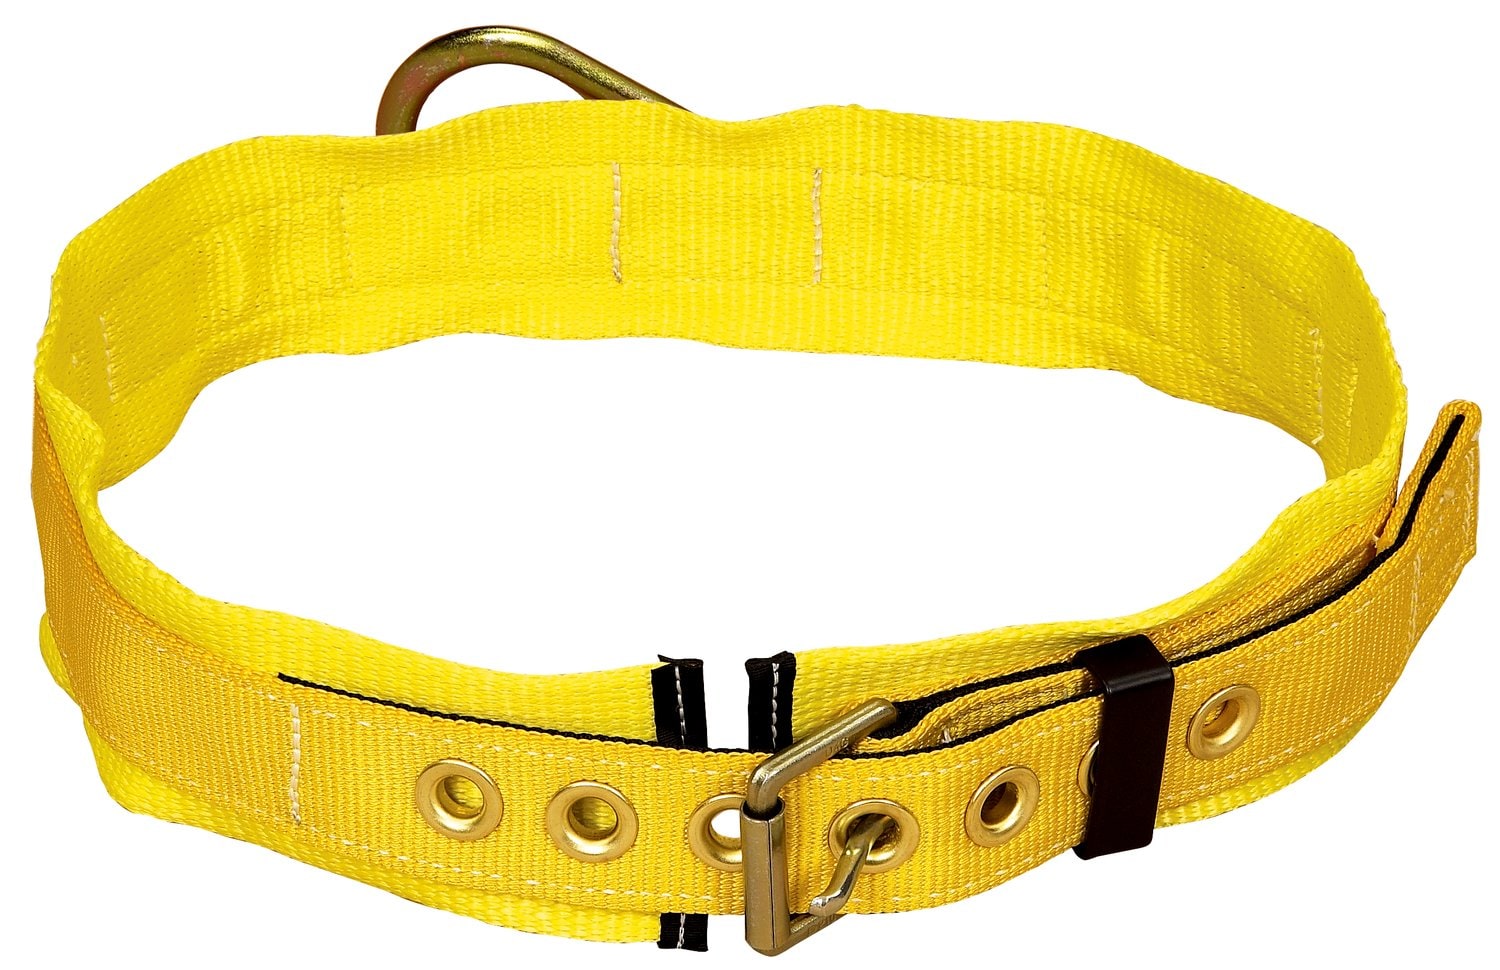 7012814990 - 3M DBI-SALA Derrick Tongue Buckle Positioning Belt with Tongue Buckle Harness Connector 1000556, Yellow, 2X